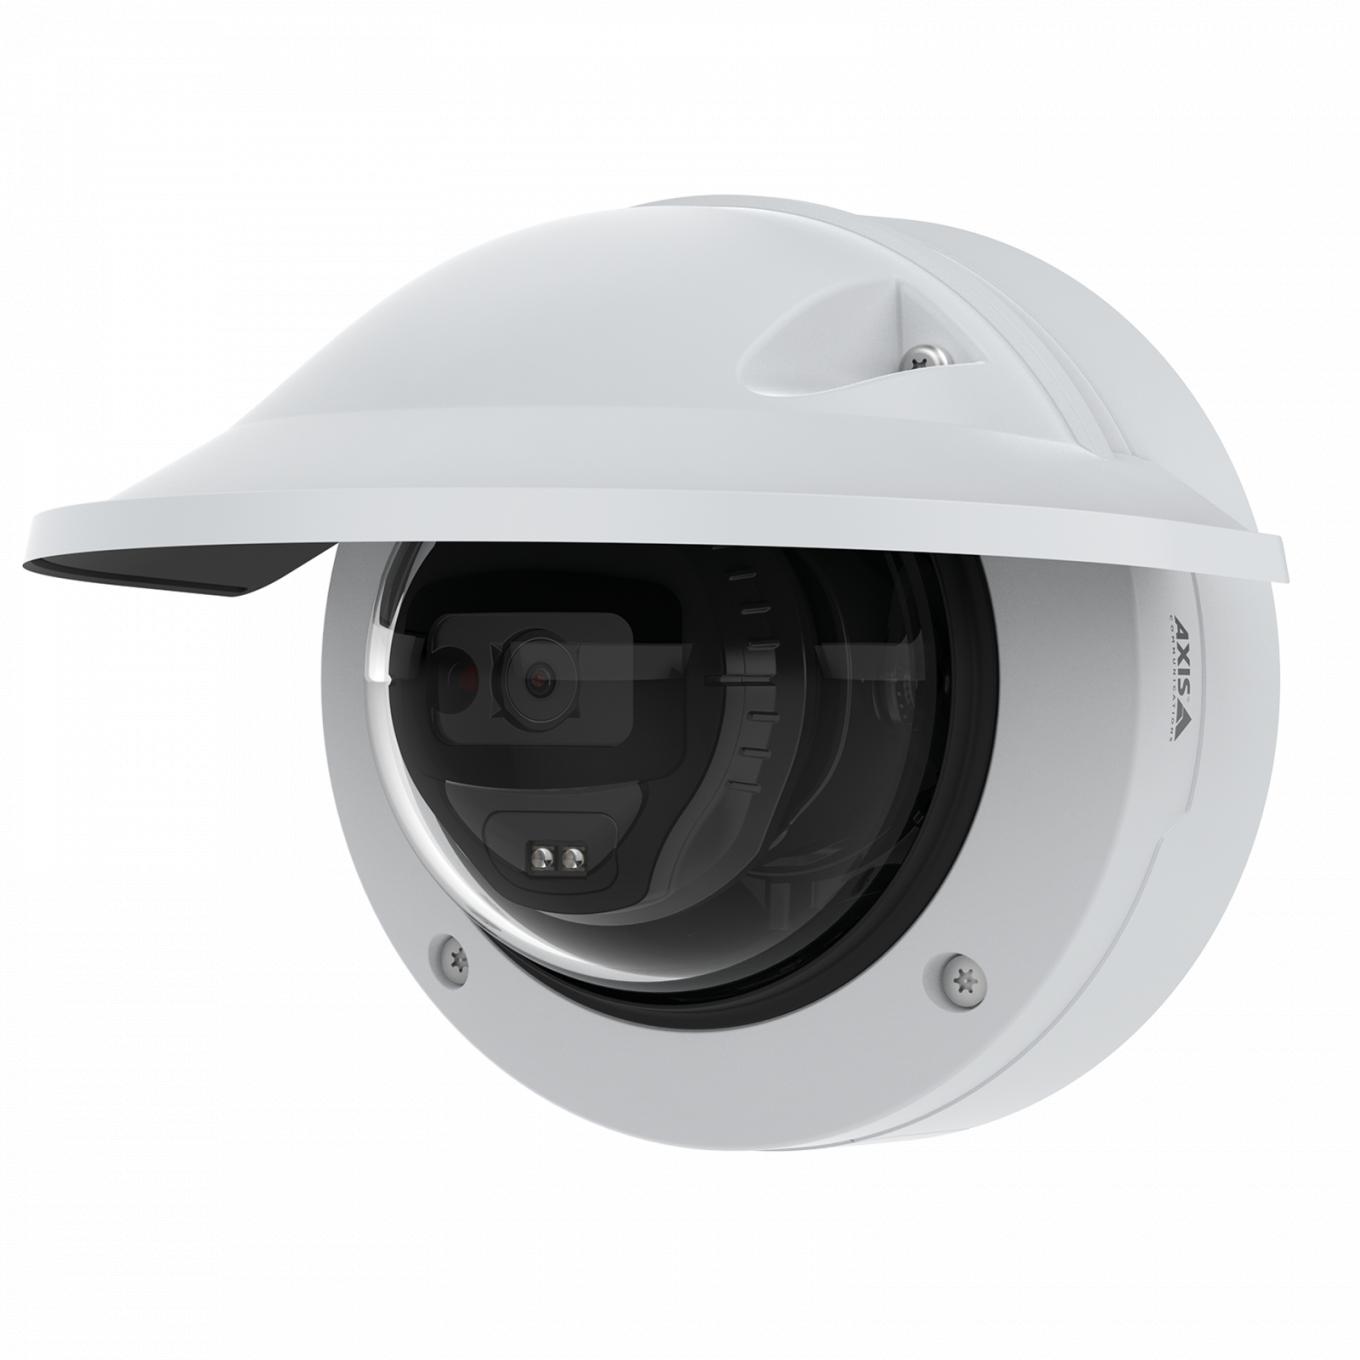 AXIS M3215-LVE Dome Camera | Axis Communications